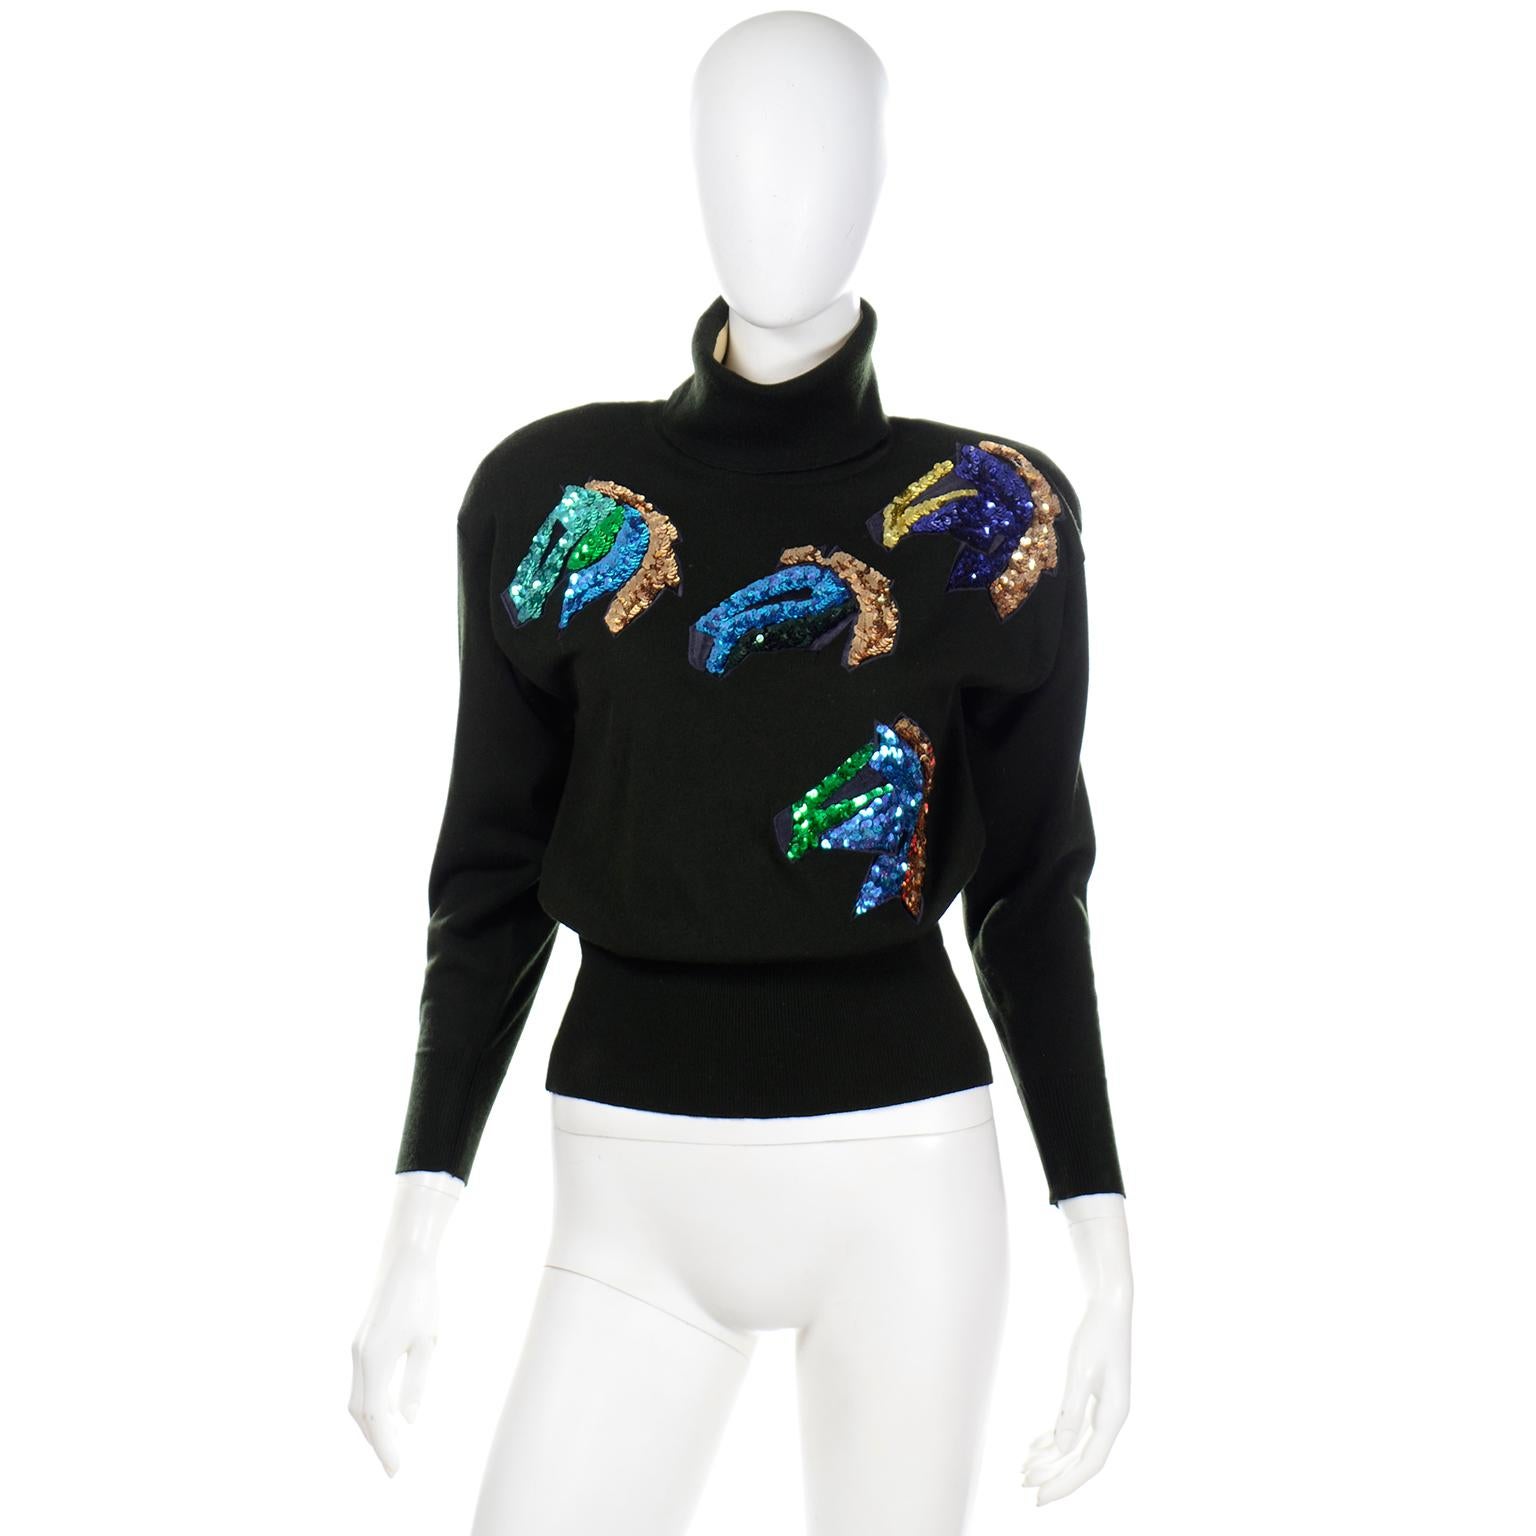 This is a really fun, beautiful vintage Escada black turtleneck sweater embellished with blue, green, copper and black sequin horse heads.  Margaretha Ley loved horses and this novelty sweater is a great example of how she turned a theme into a high